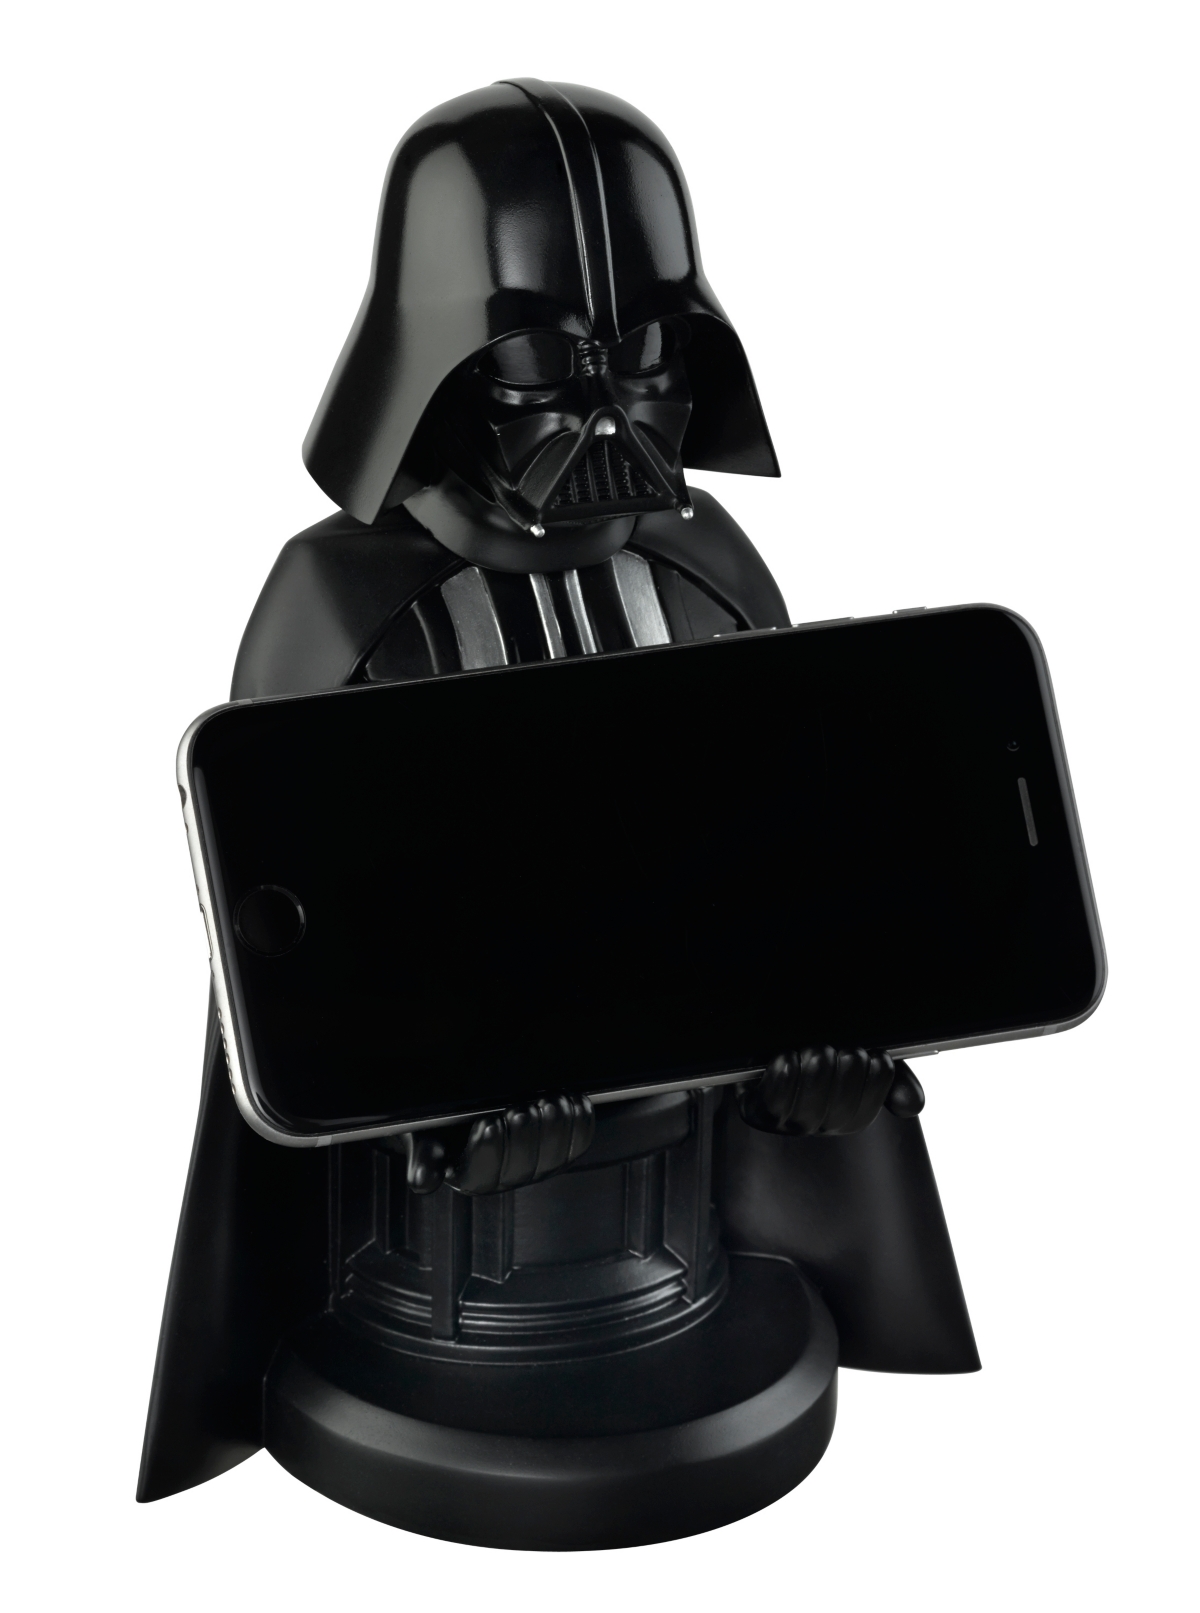 Shop Exquisite Gaming Cable Guy Controller And Phone Holder Star Wars Classic Sith Lord Darth Vader 8" In Multi